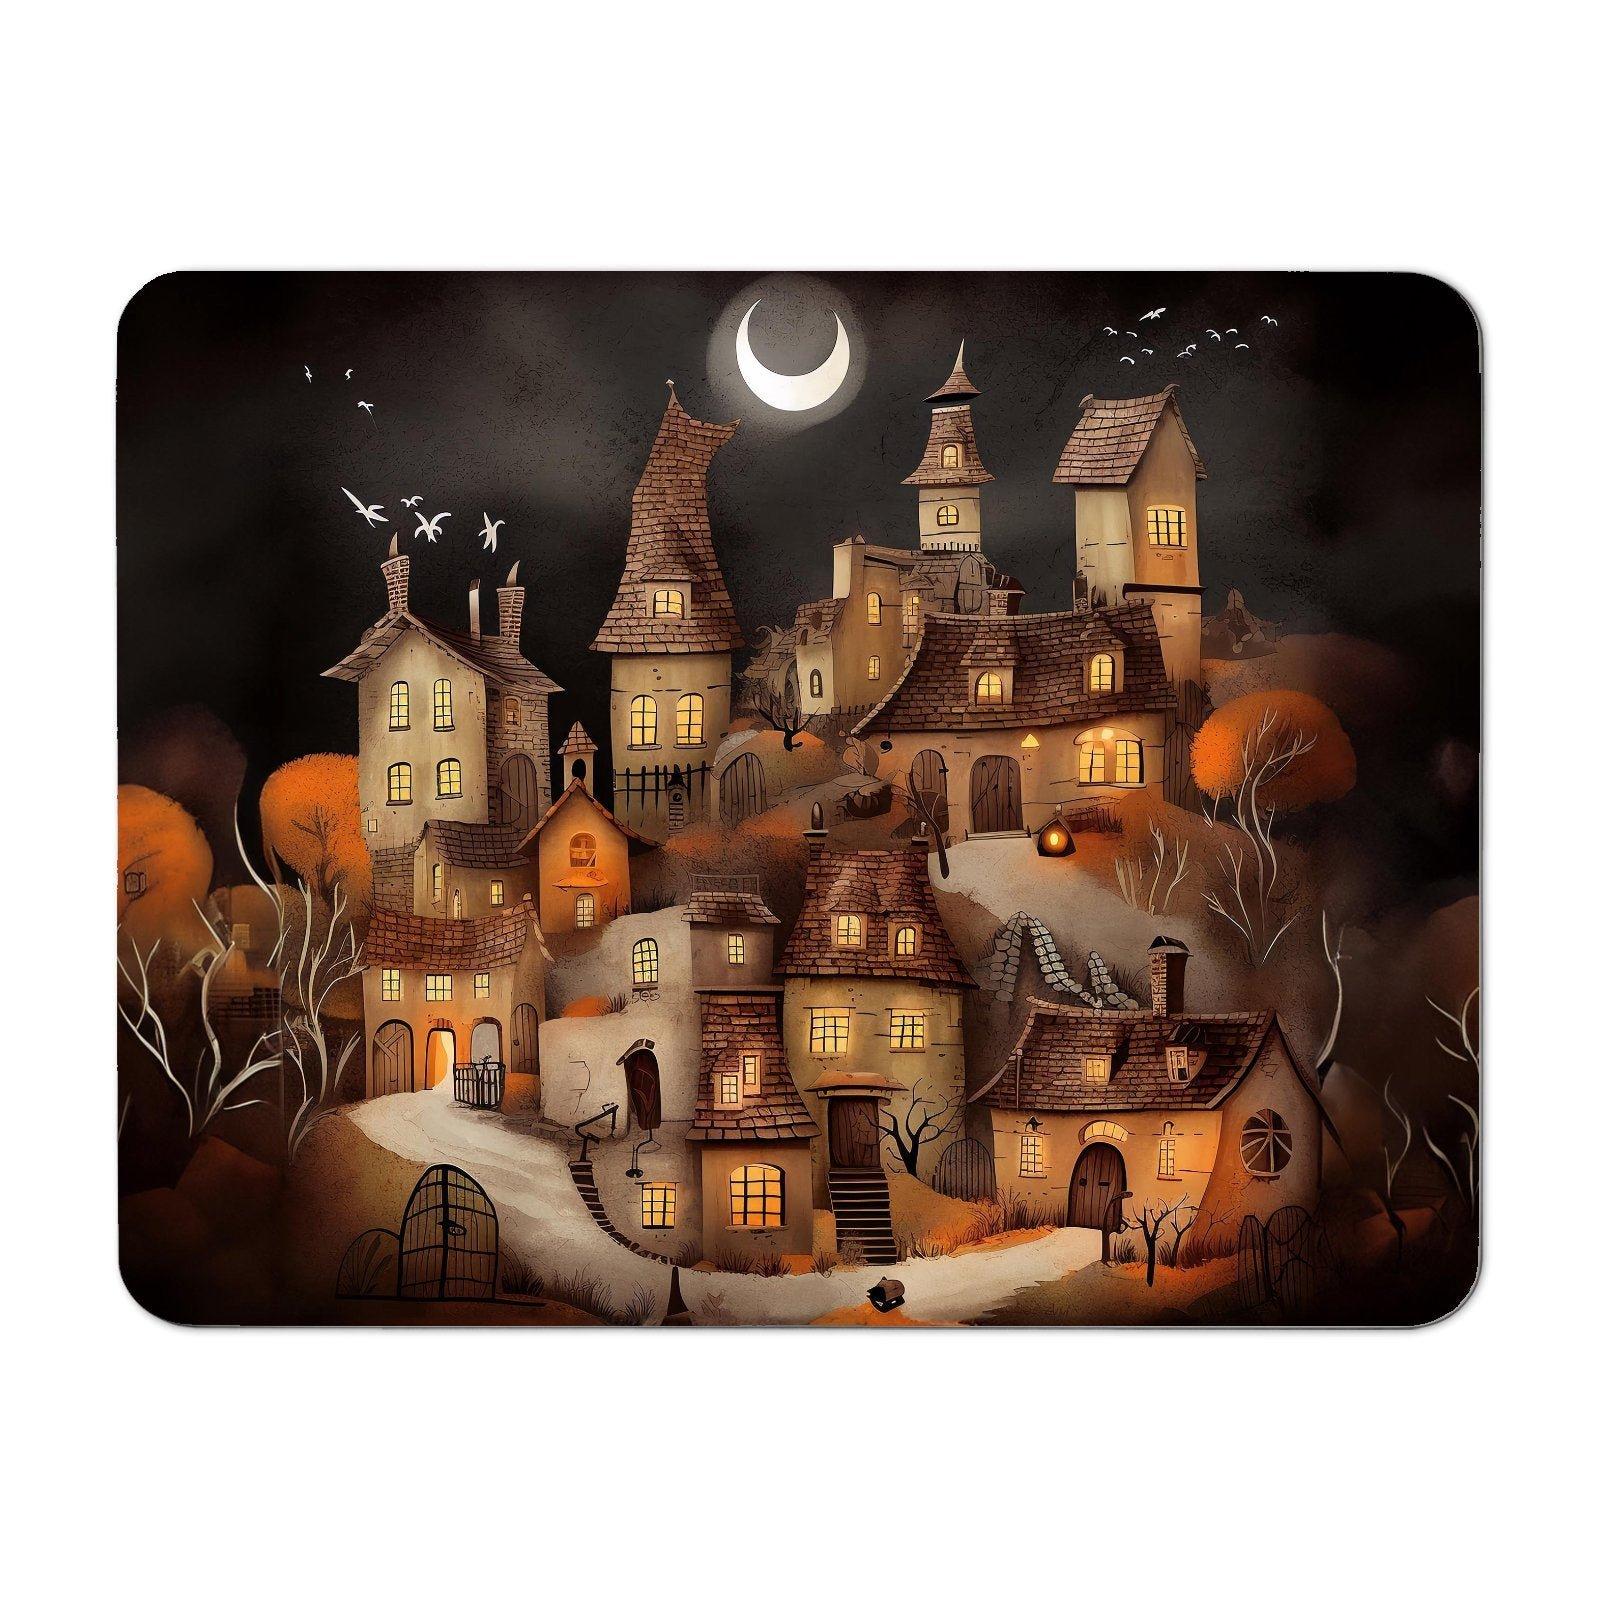 Spooky Halloween Village Placemats